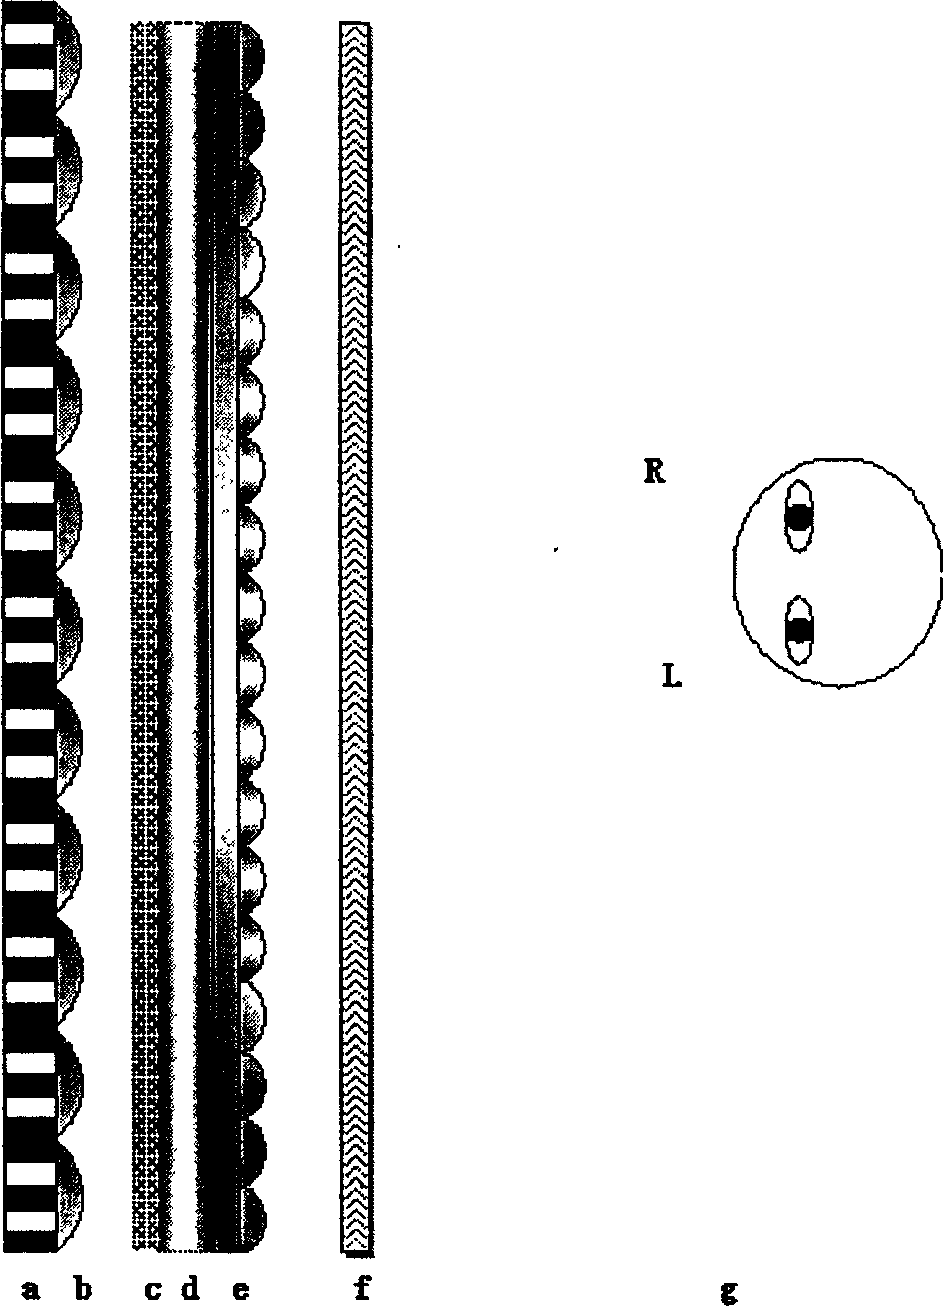 Automatic stereoscopic display device with gradual gradient, microlens array, parallax and wide screen